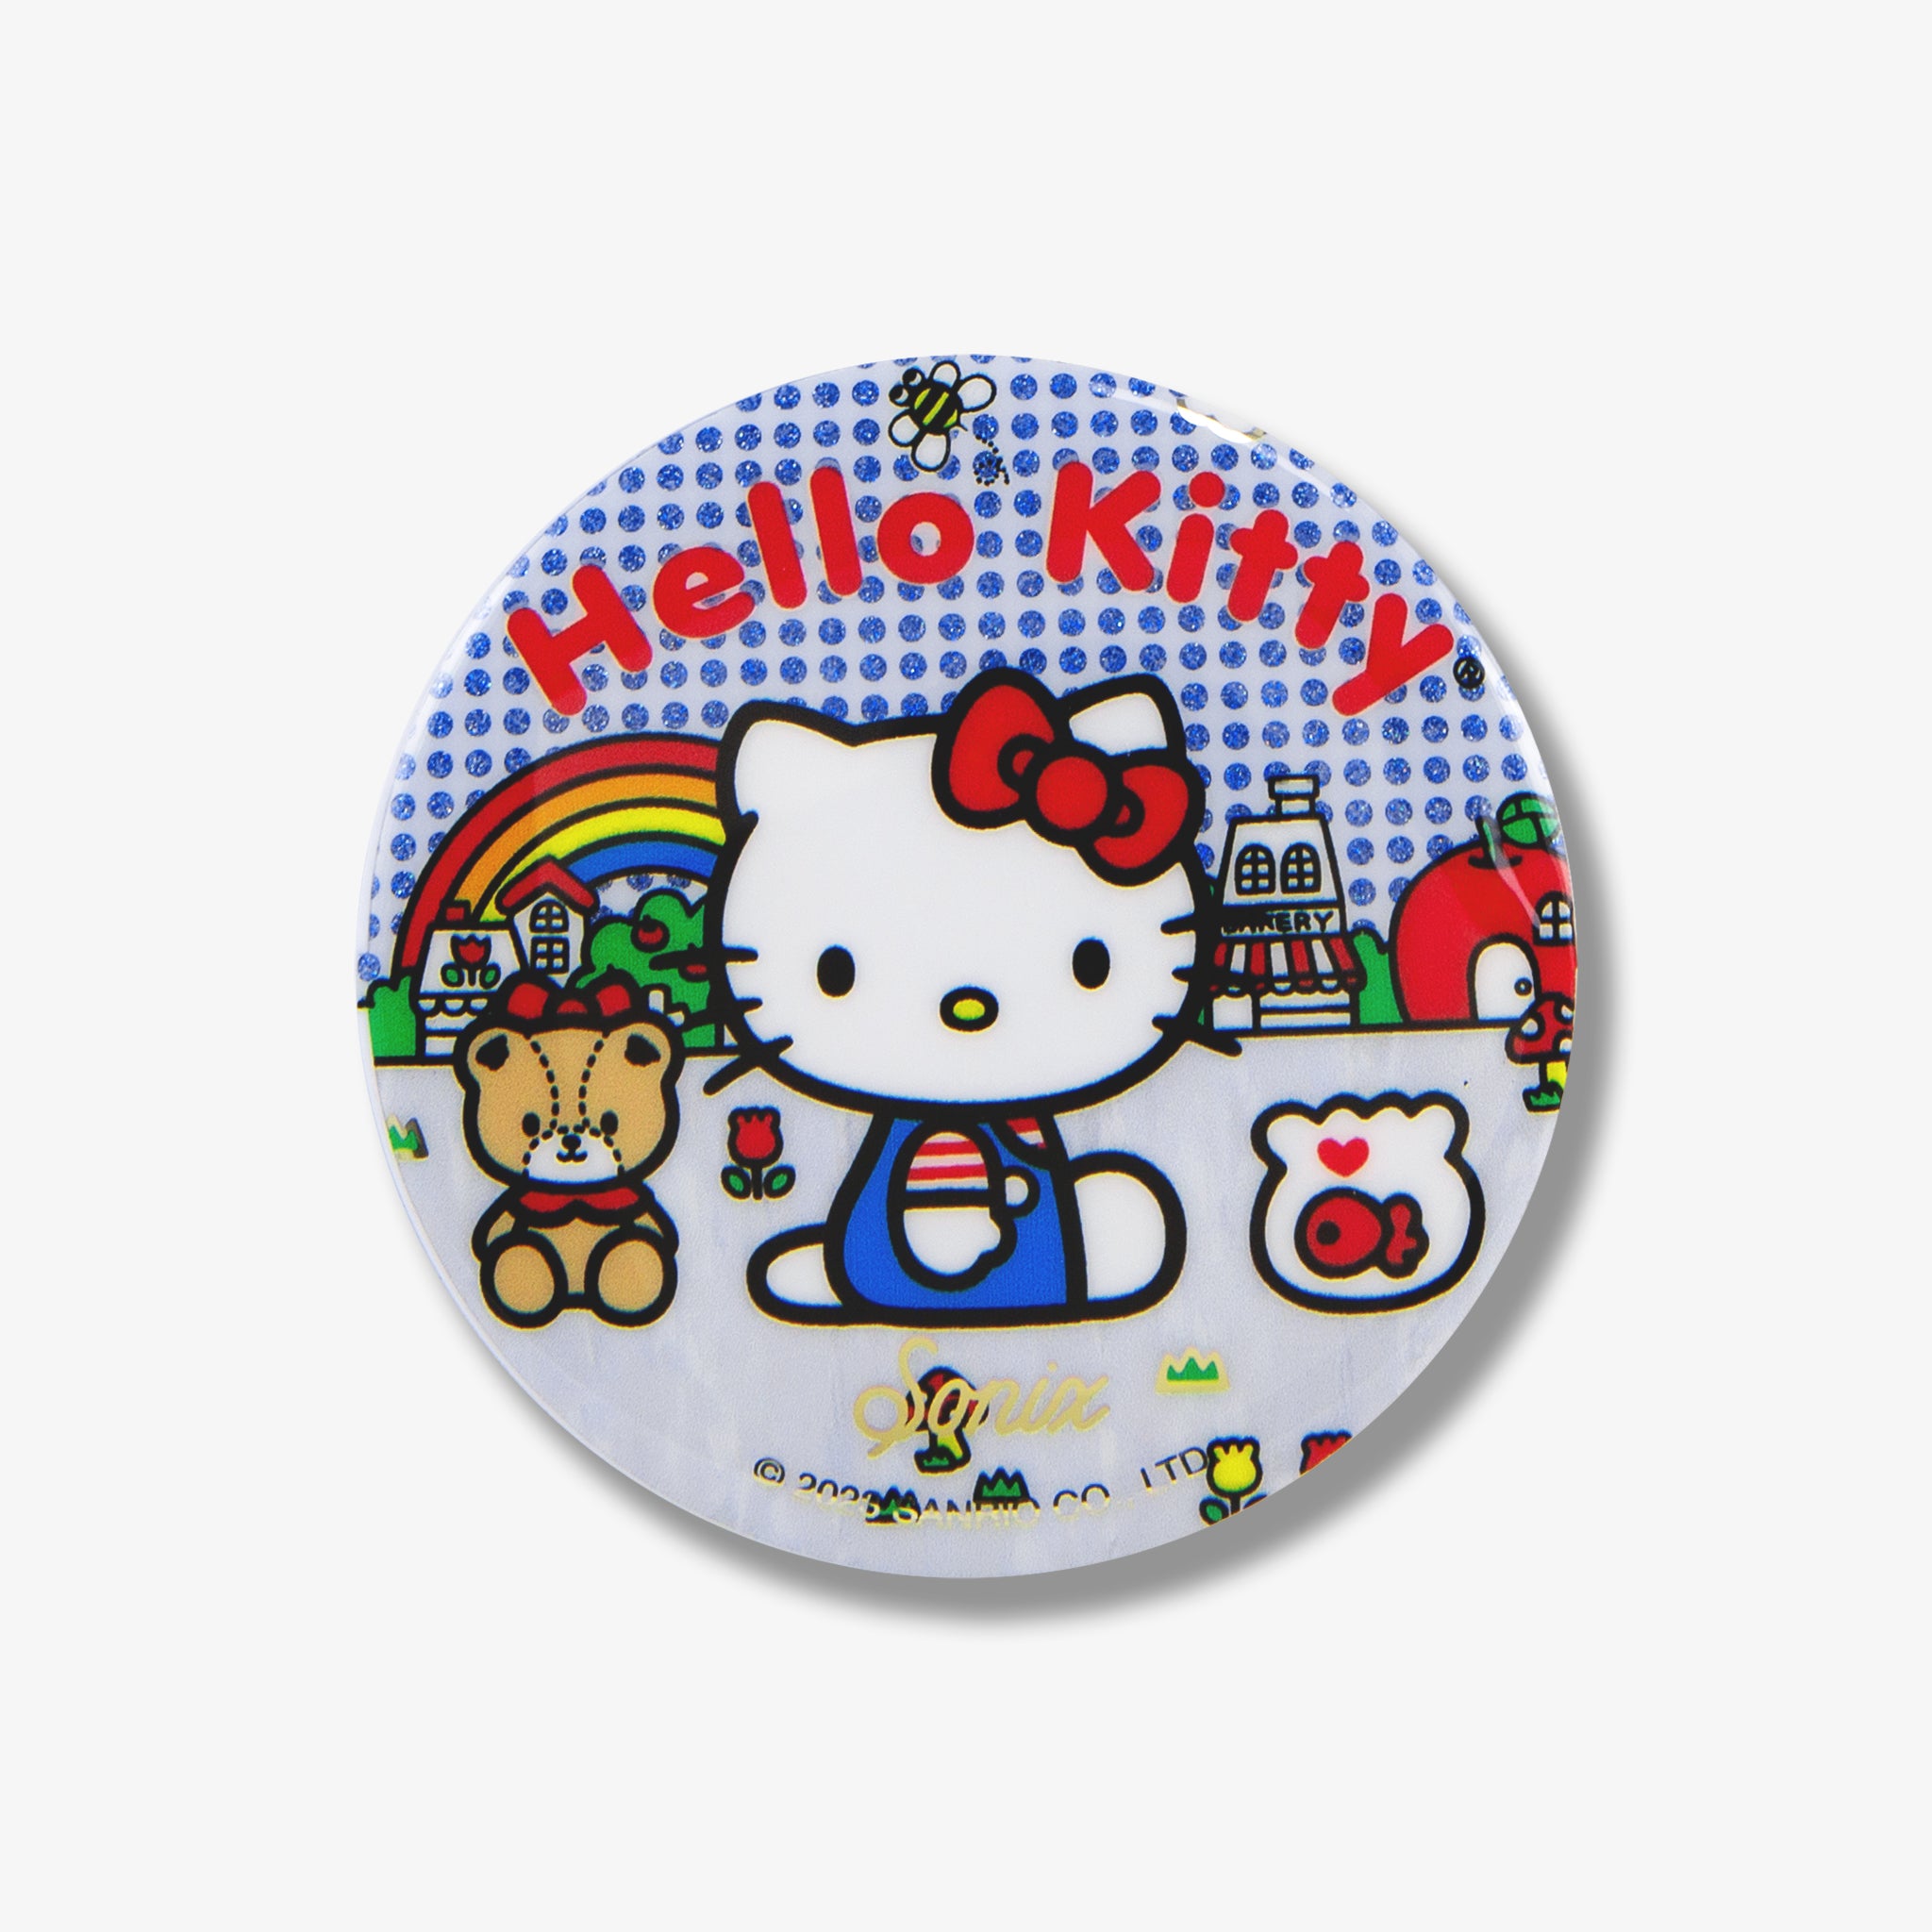 MagLink™ Snap Grip - Good Morning Hello Kitty®